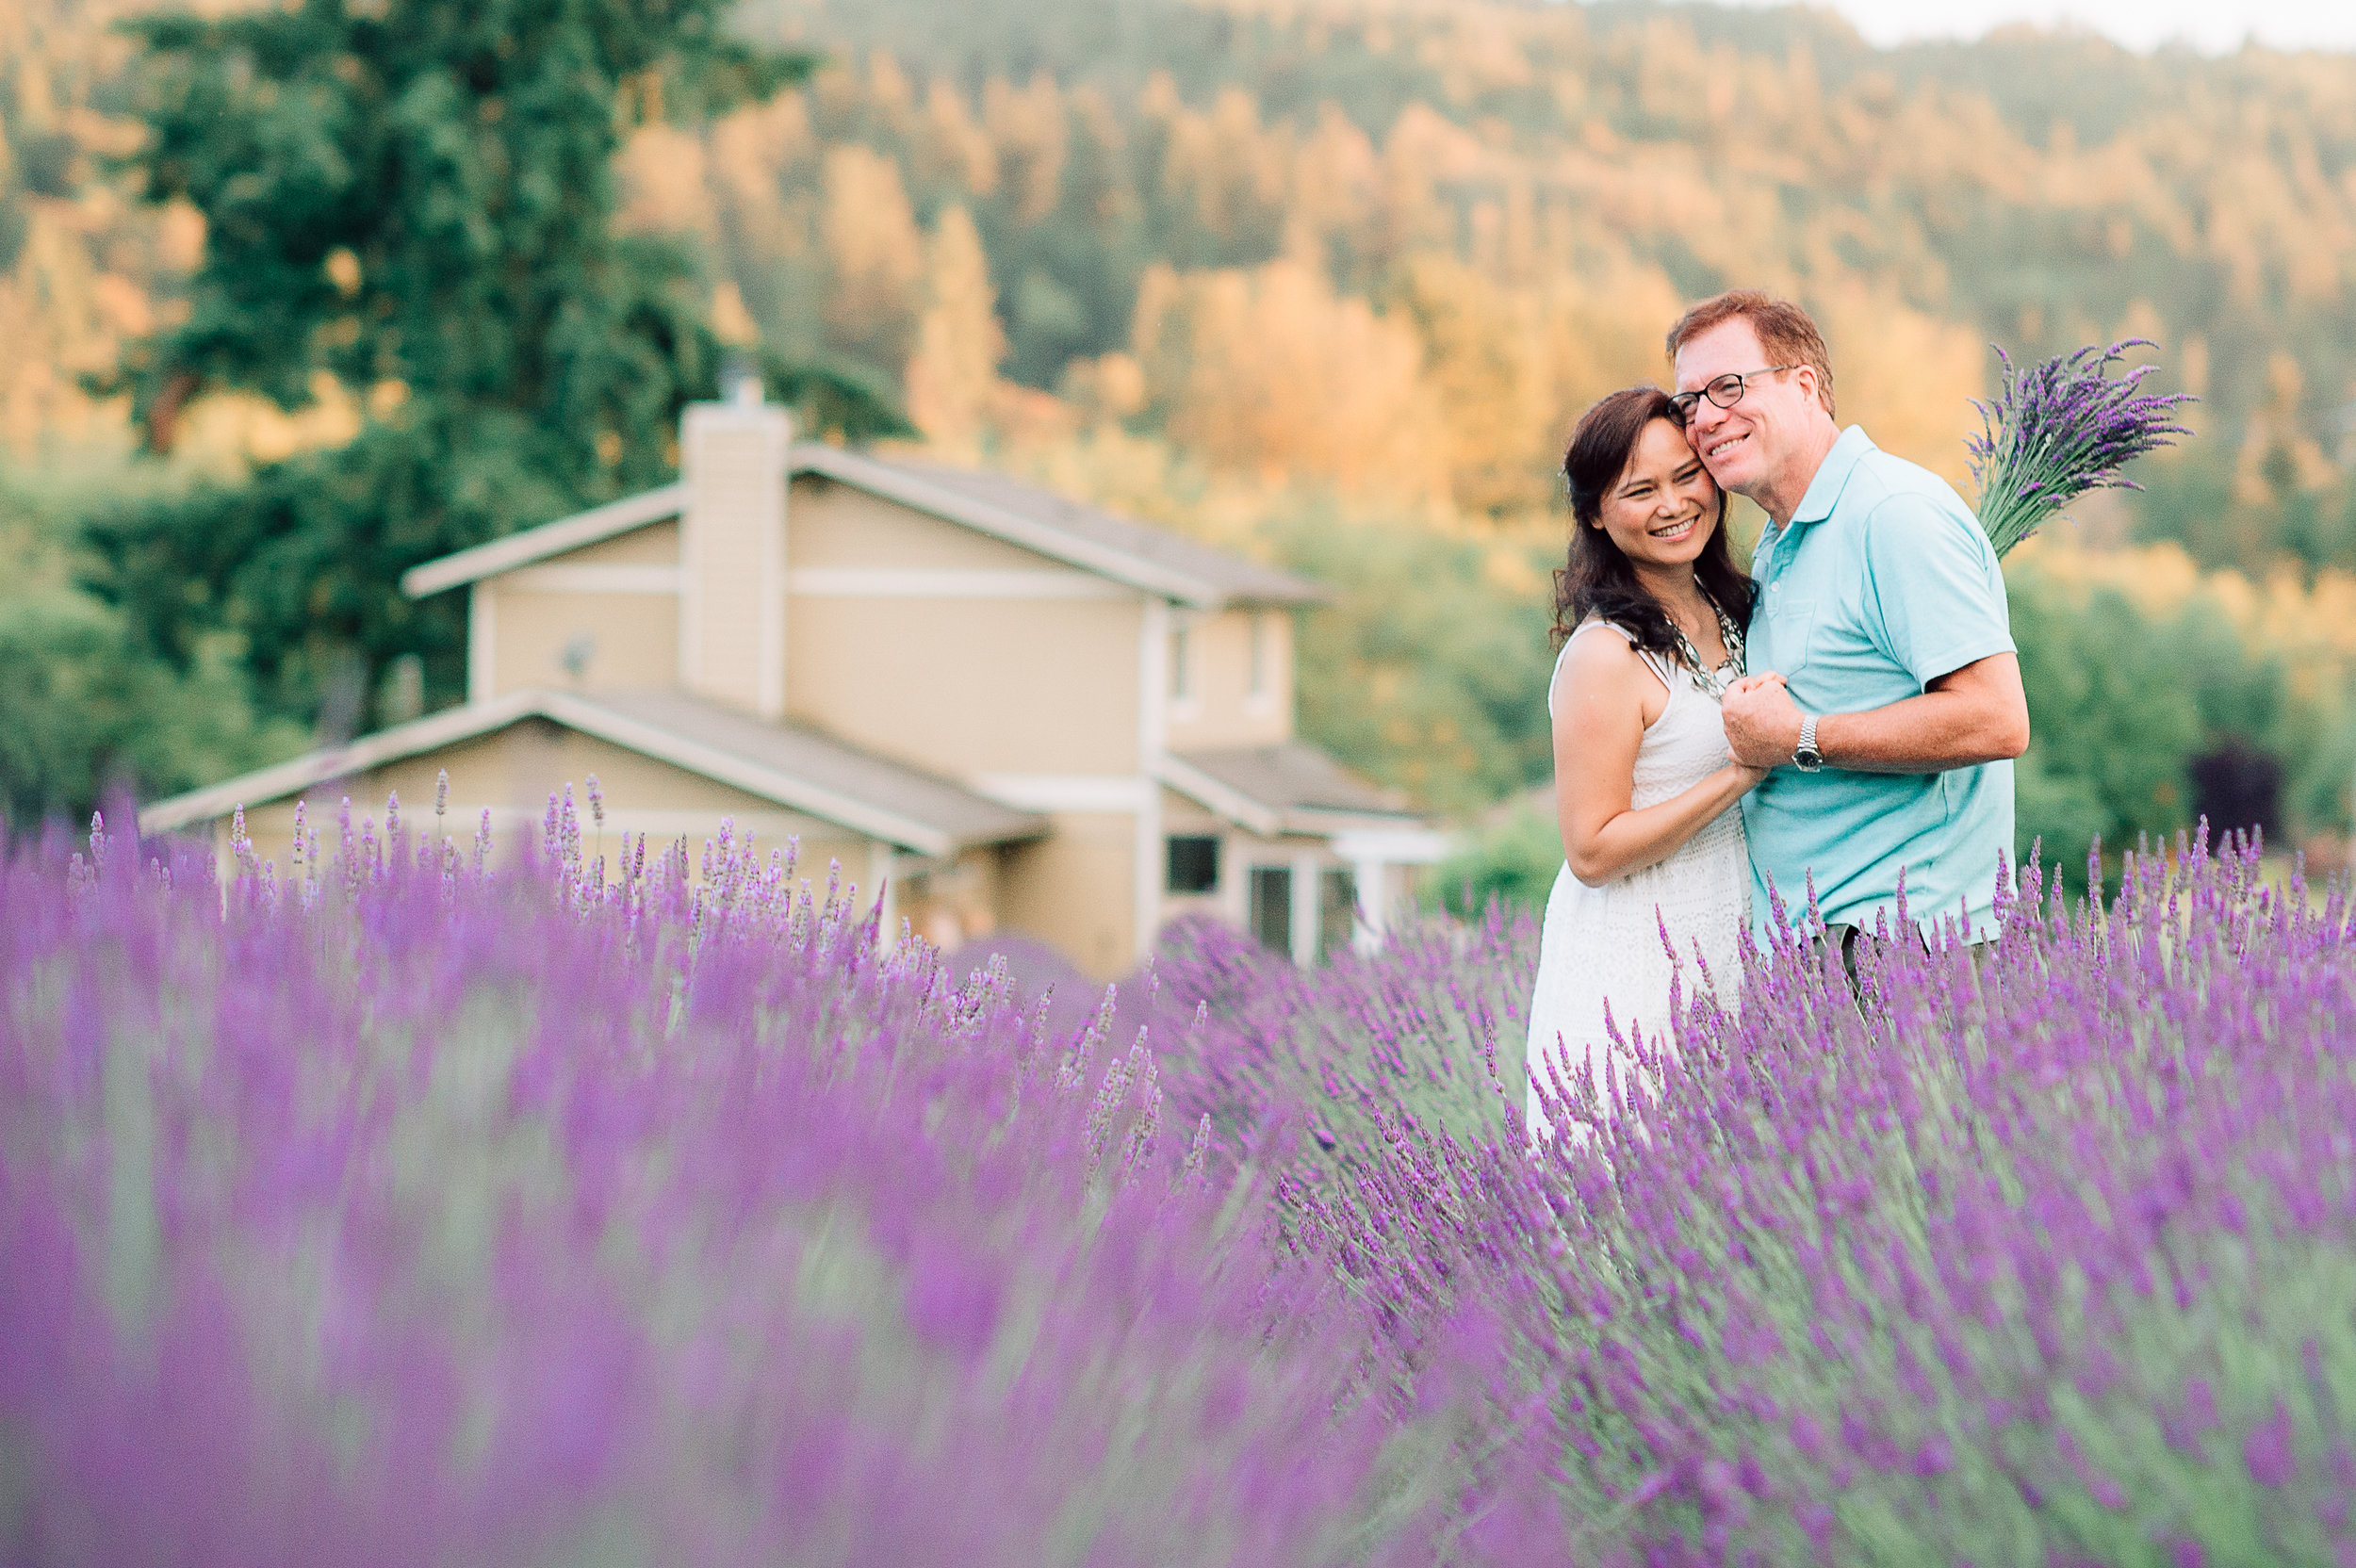 engagement_lavenderfield_youseephotography_LidiaOtto (64).jpg